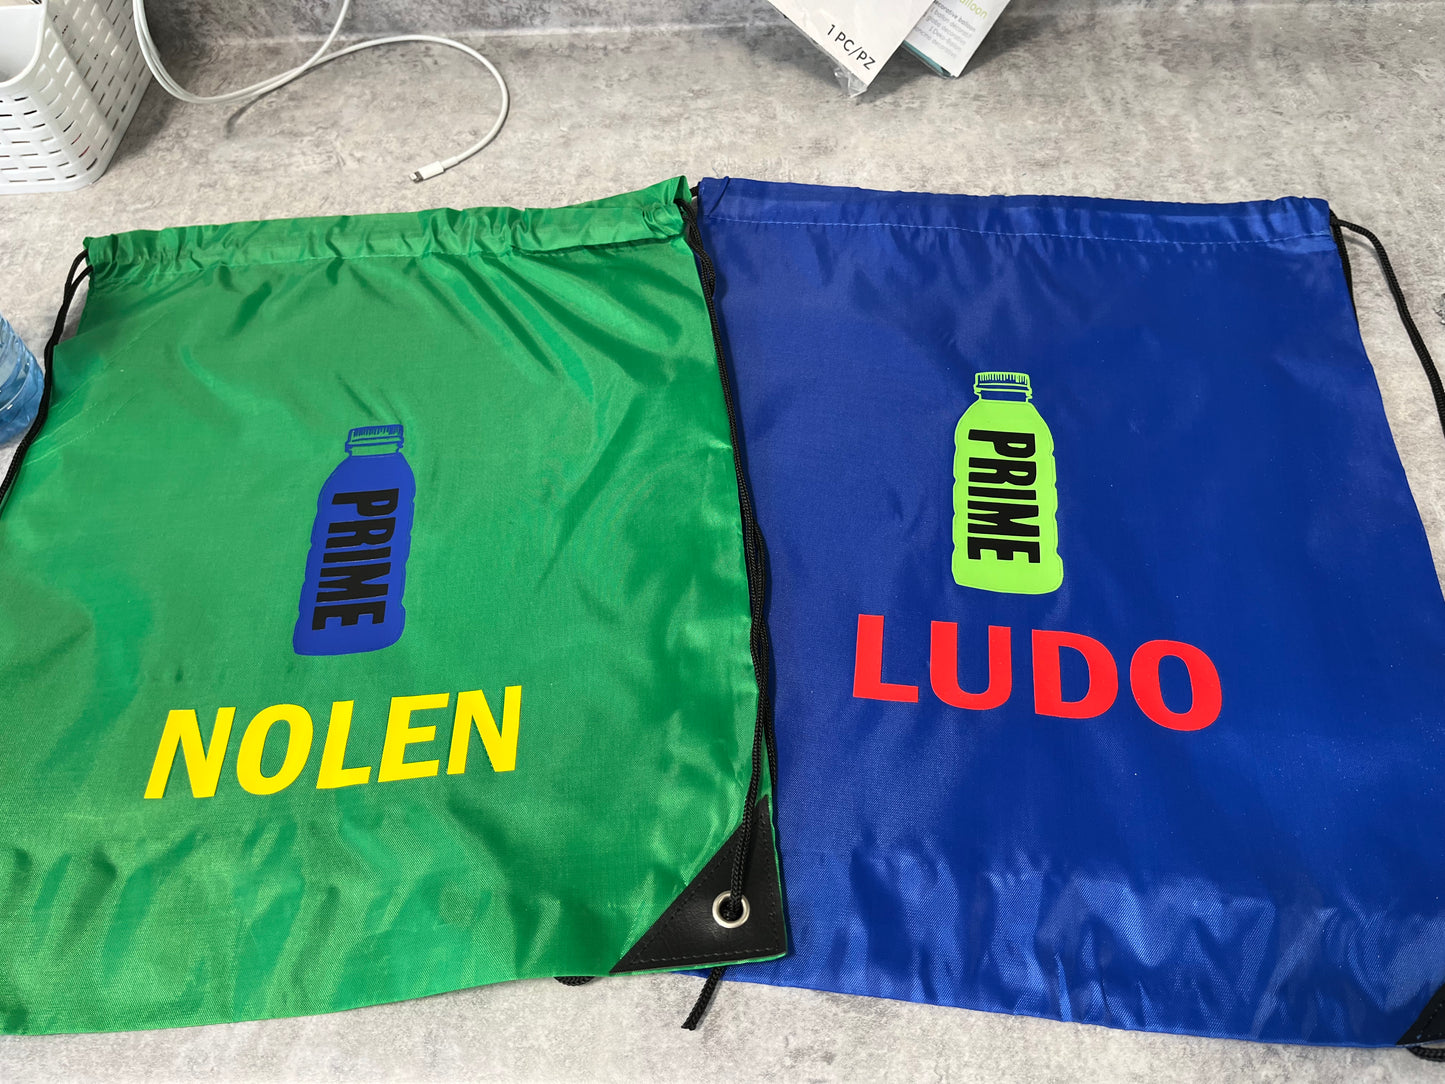 Personalized draw string bags